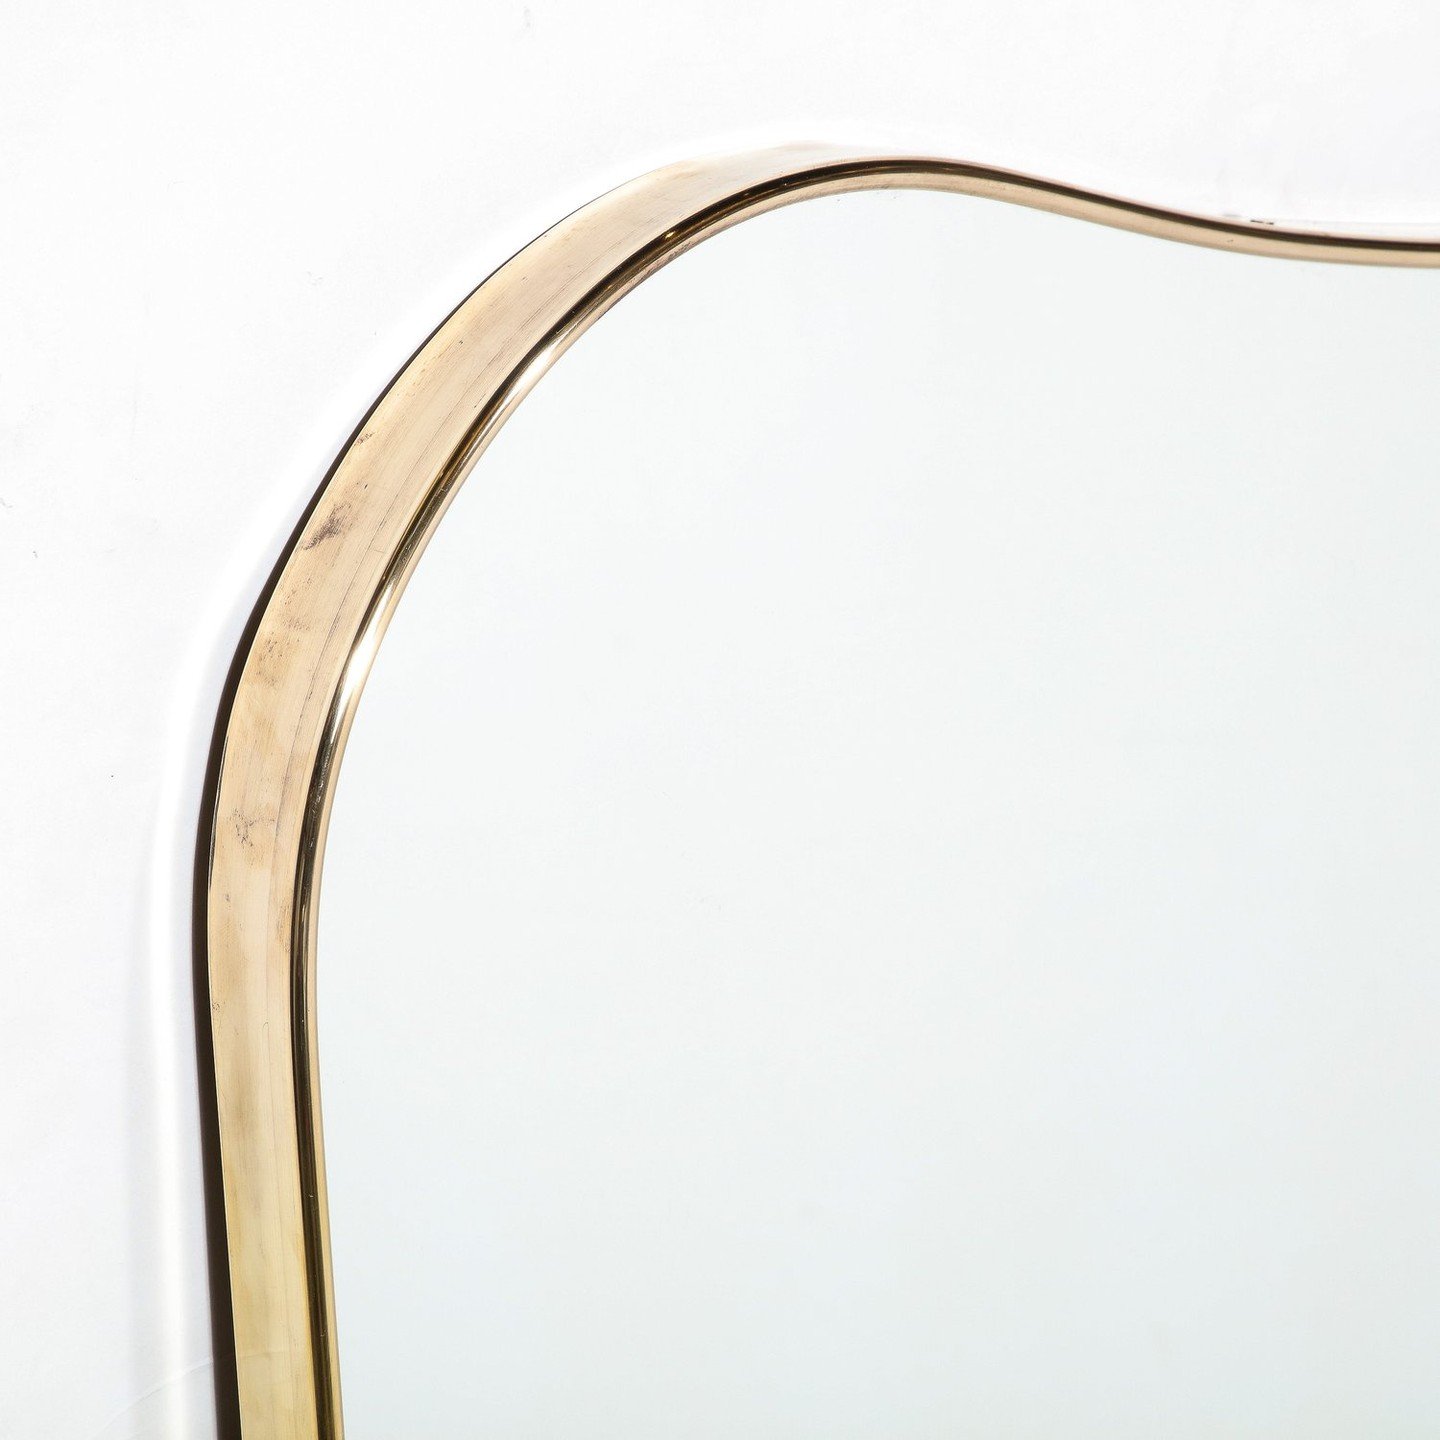 Mid-Century Modernist Shield Form Polished Brass Wrapped Mirror

This lovely Mid-Century Modernist Shield Form Polished Brass Wrapped Mirror Originates from Italy, Circa 1950. Features a curvilinear heraldic shield form profile with raised &amp; roun